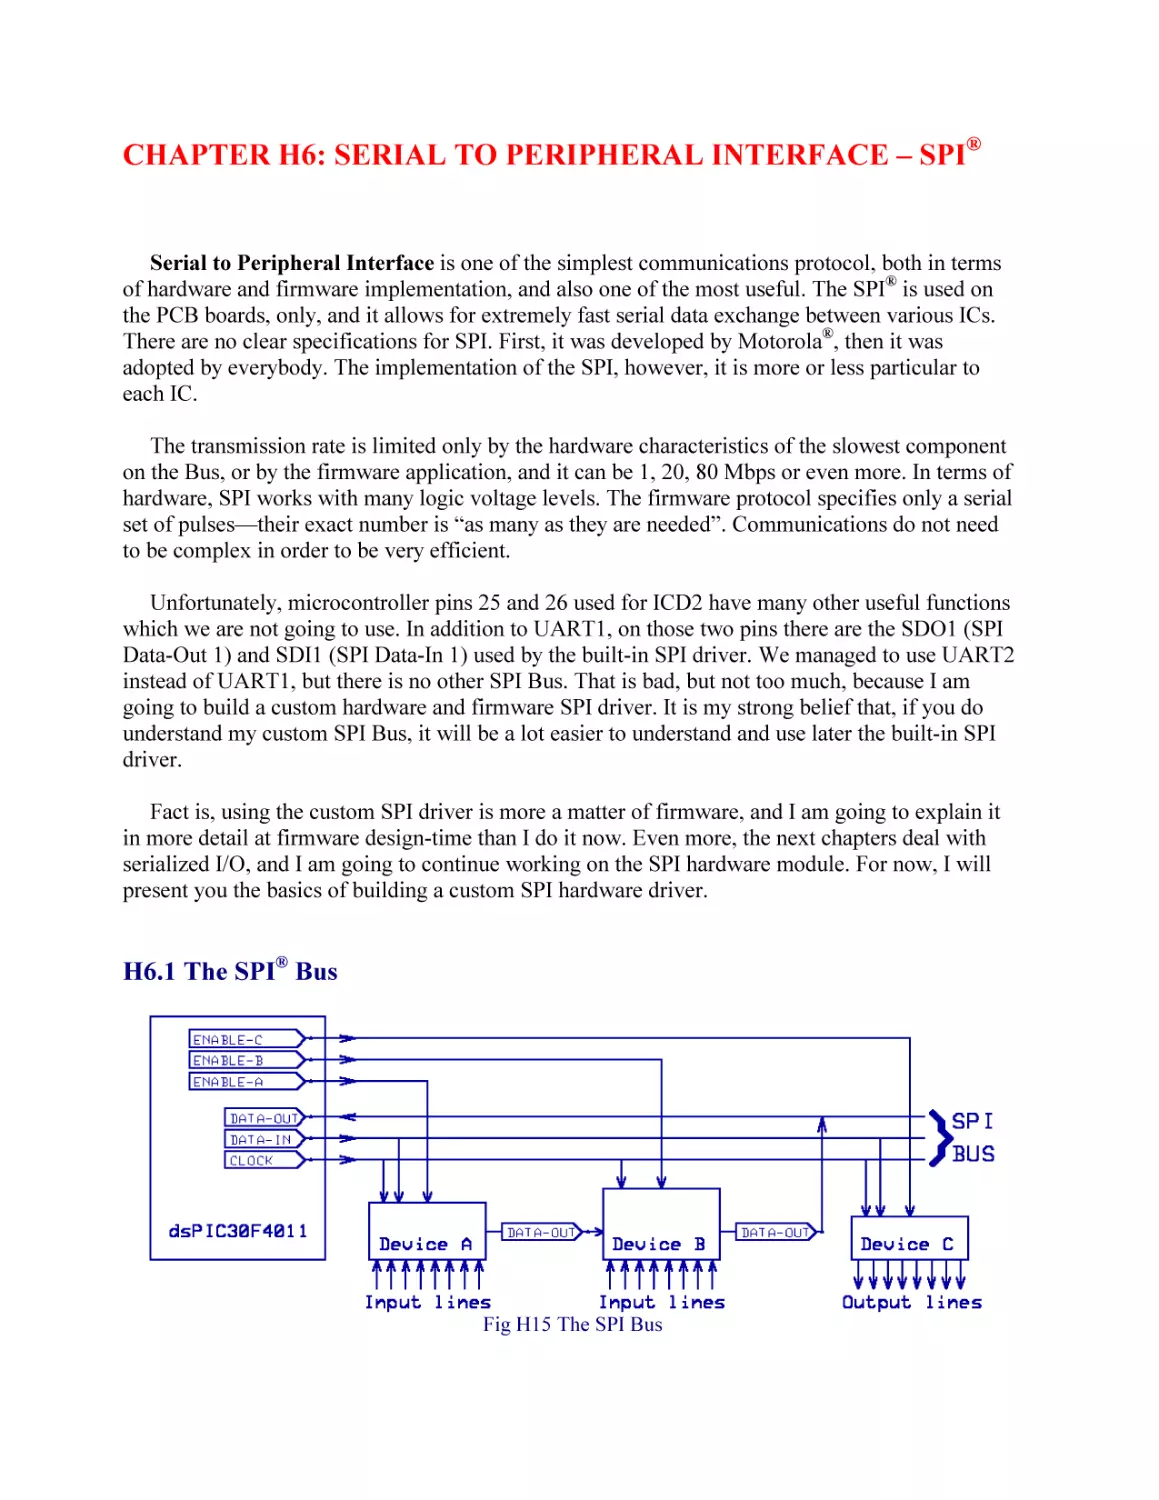 CHAPTER H6
H6.1 The SPI® Bus